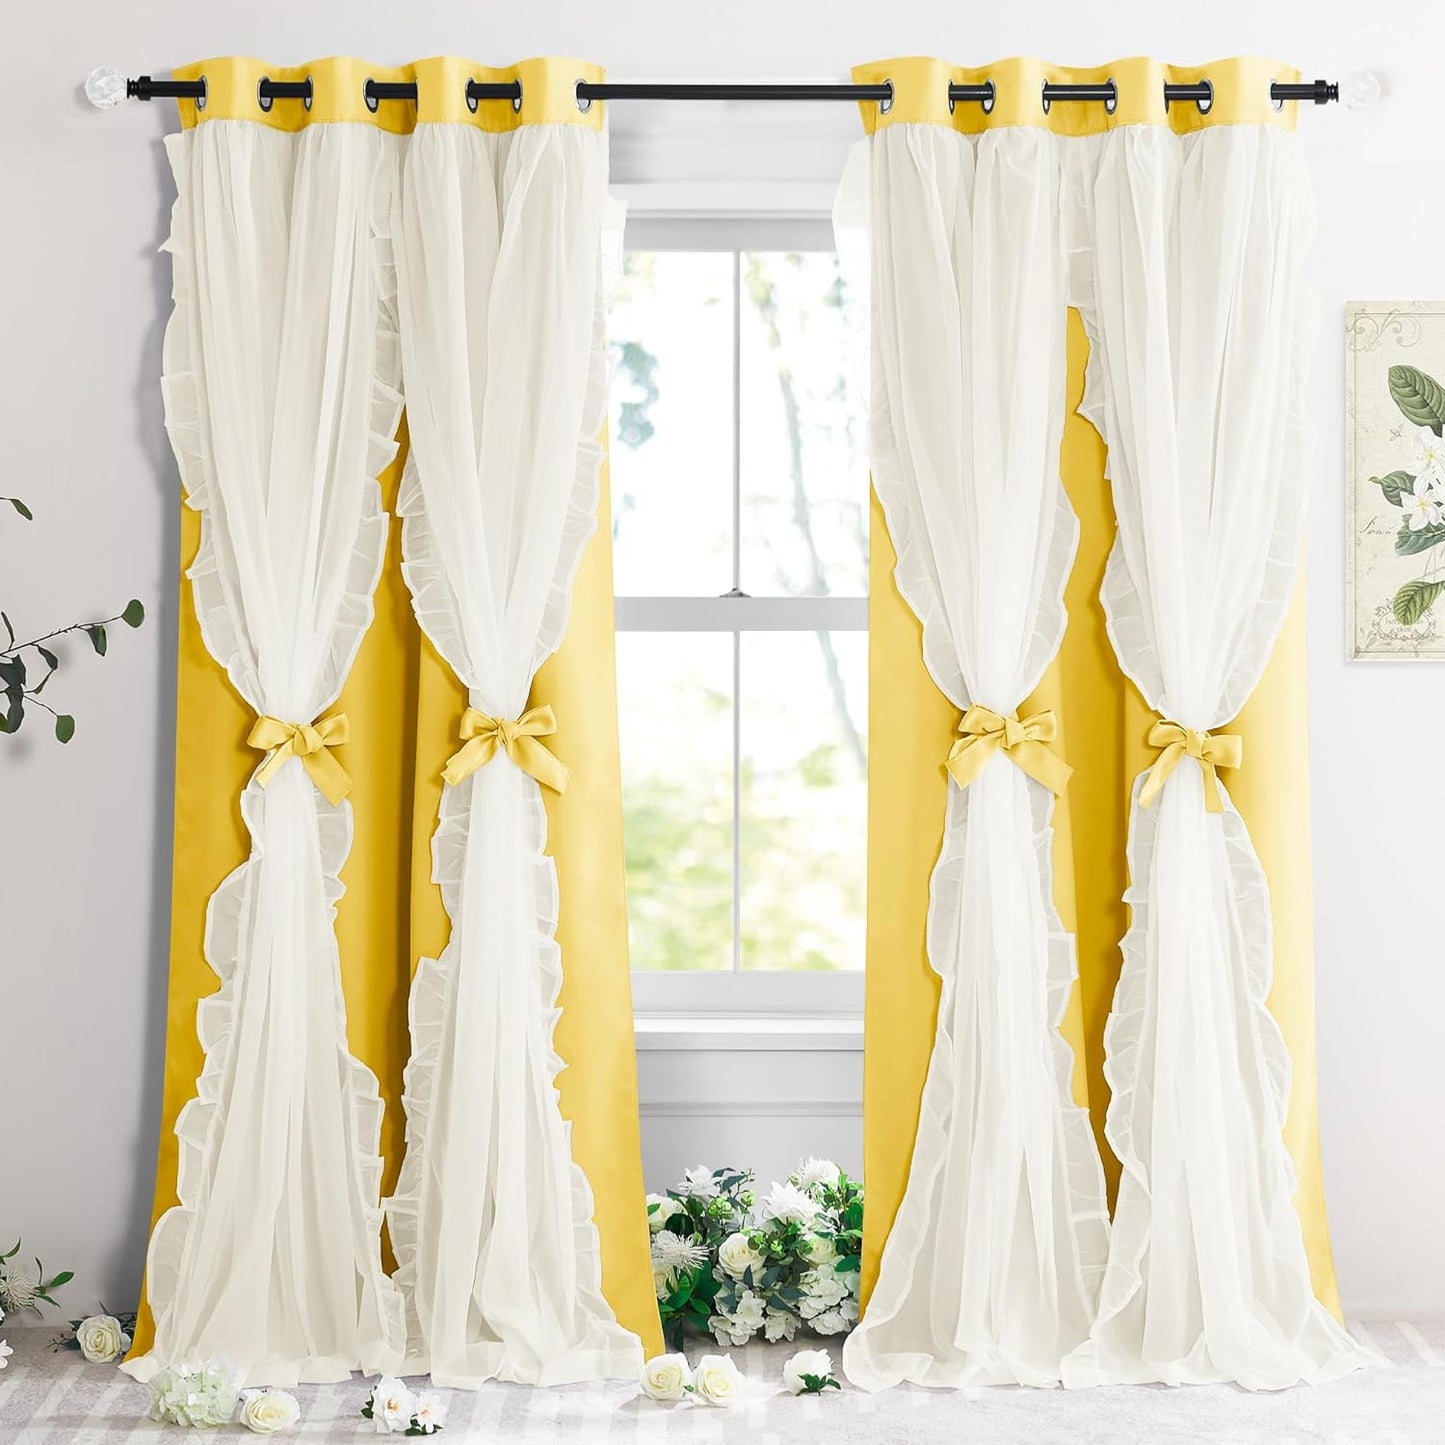 PONY DANCE Blackout Curtains for Living Room Decor Window Treatment Double Layer Drapes Ruffle Sheer Overlay Farmhouse Rustic Design, W 52 X L 84 Inches, Sage Green, 2 Panels  PONY DANCE Lemon Yellow 52" X 84" 